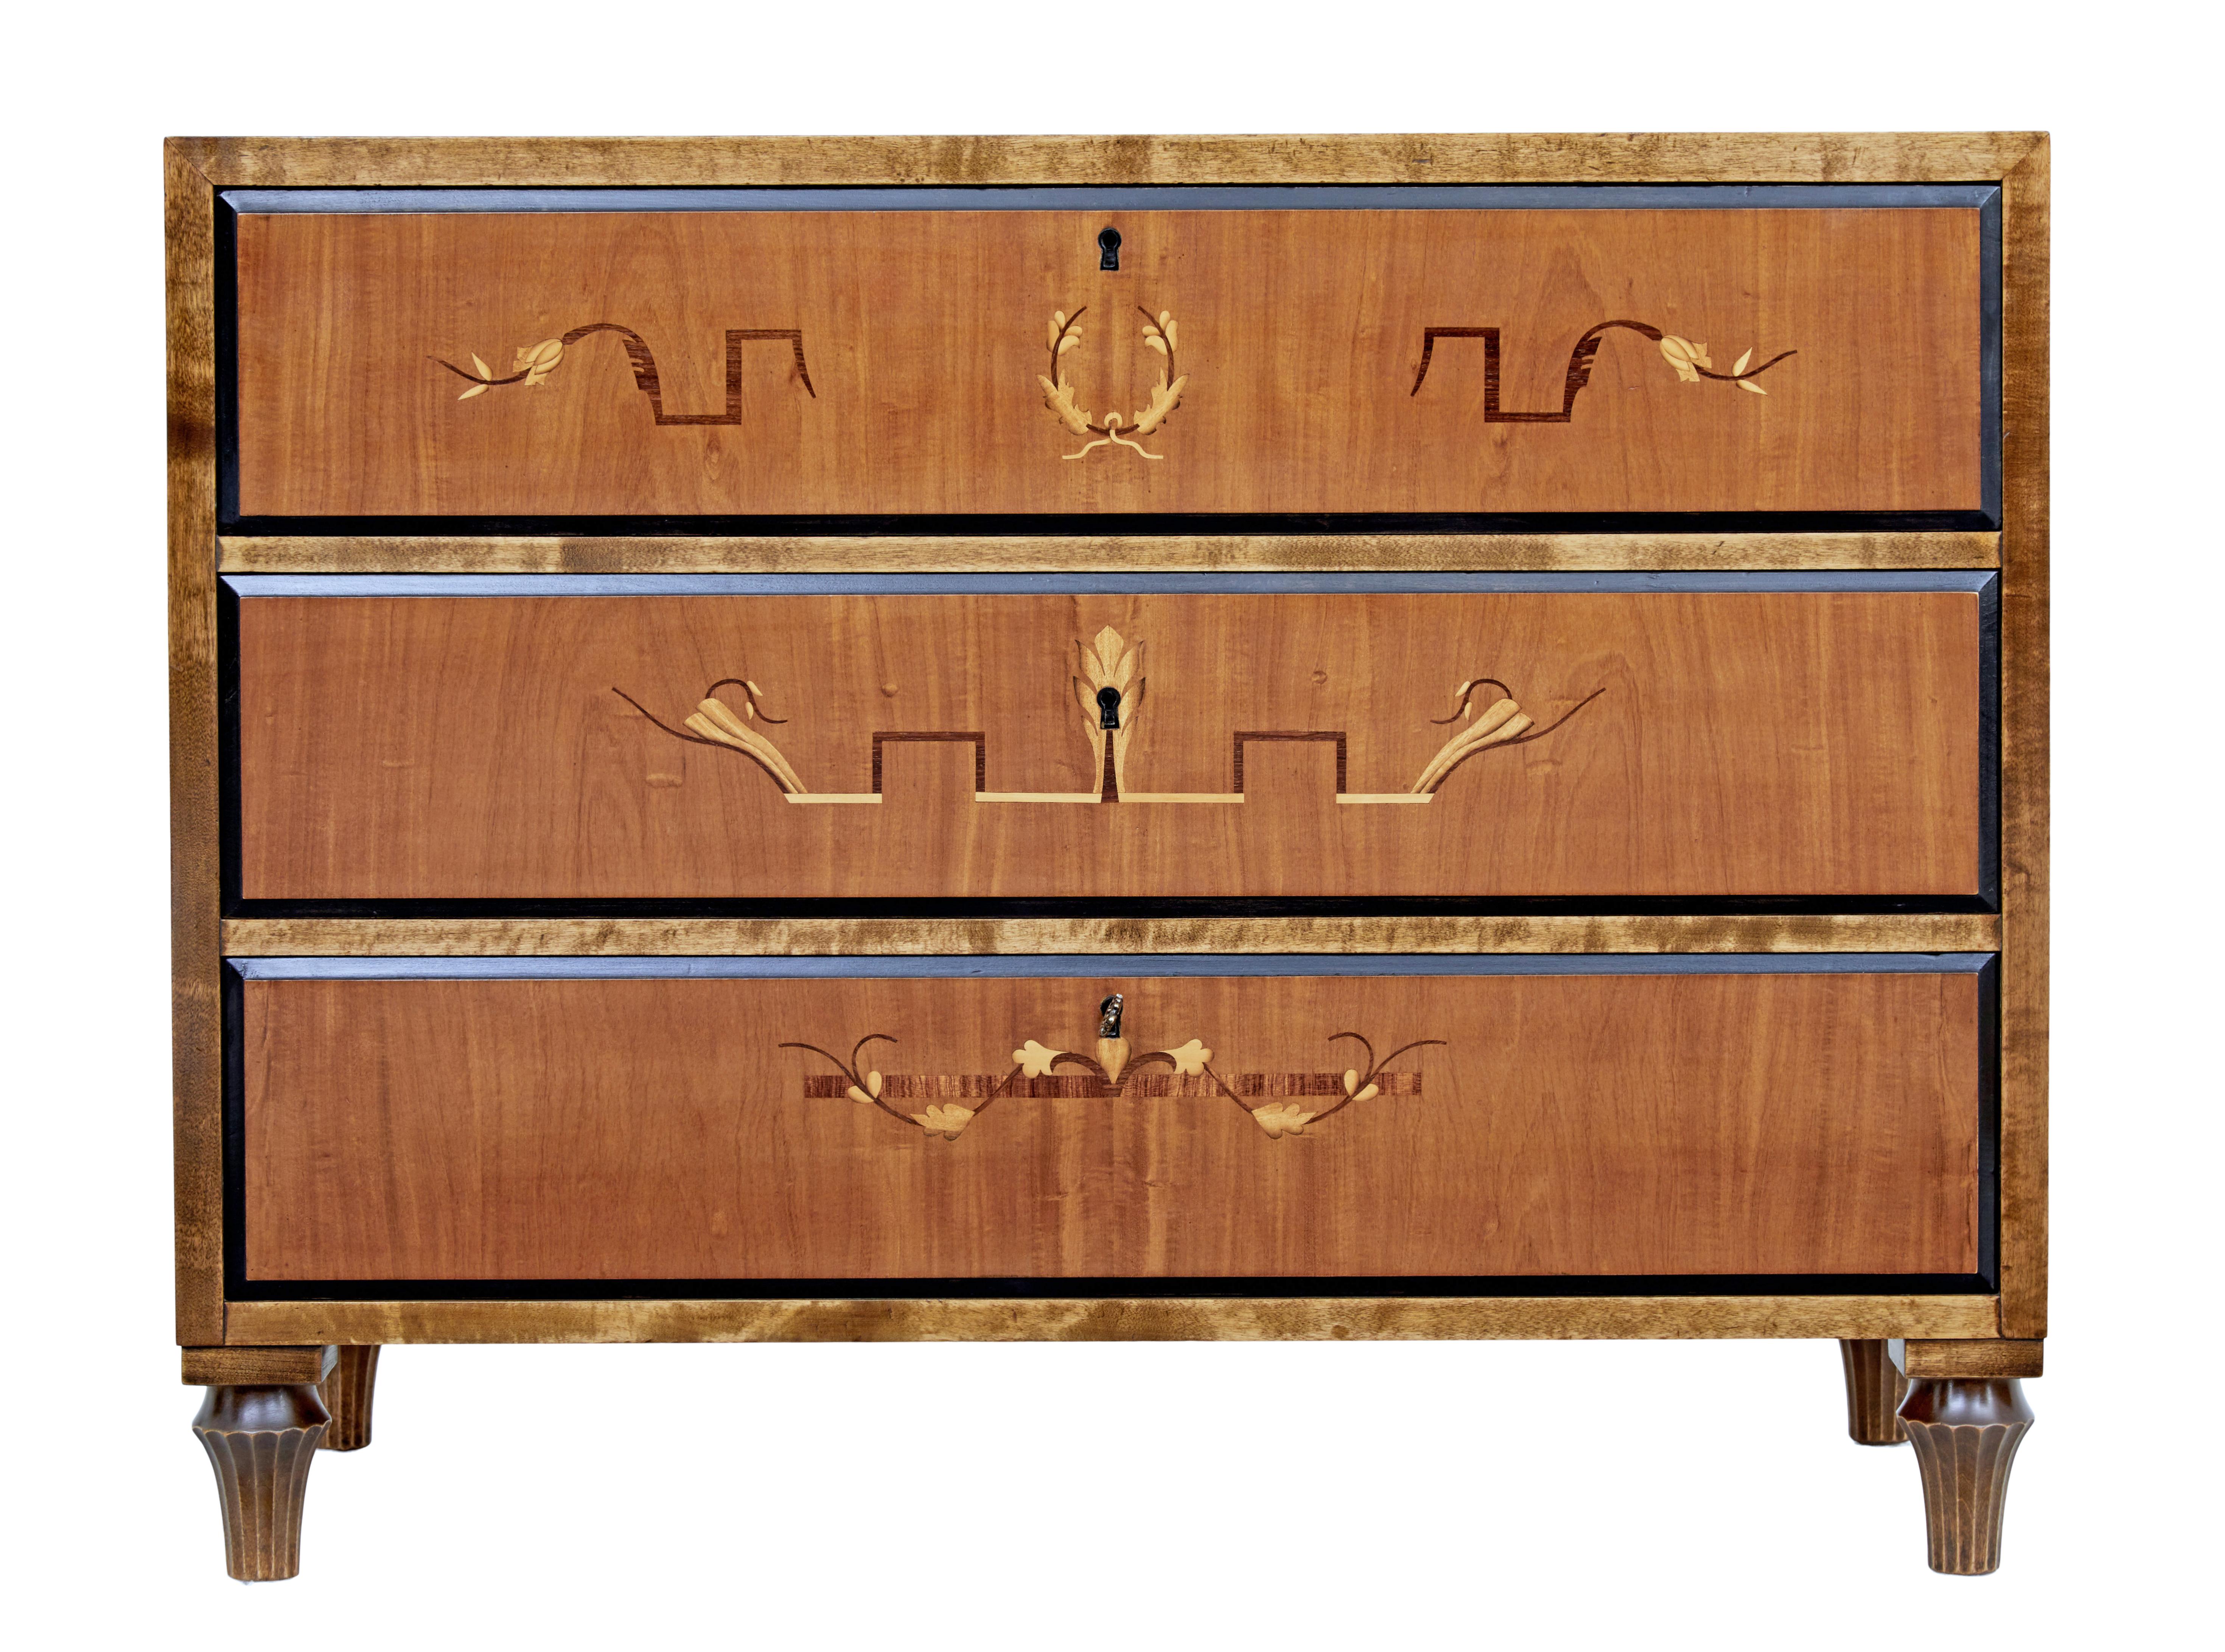 Scandinavian Art Deco inlaid chest of drawers, circa 1930.

Elegant period deco chest, fitted with 3 drawers that open on the key. Inlaid with motifs to the drawer fronts, with ebonized outer edge. Rich birch top and sides.

Standing on fluted